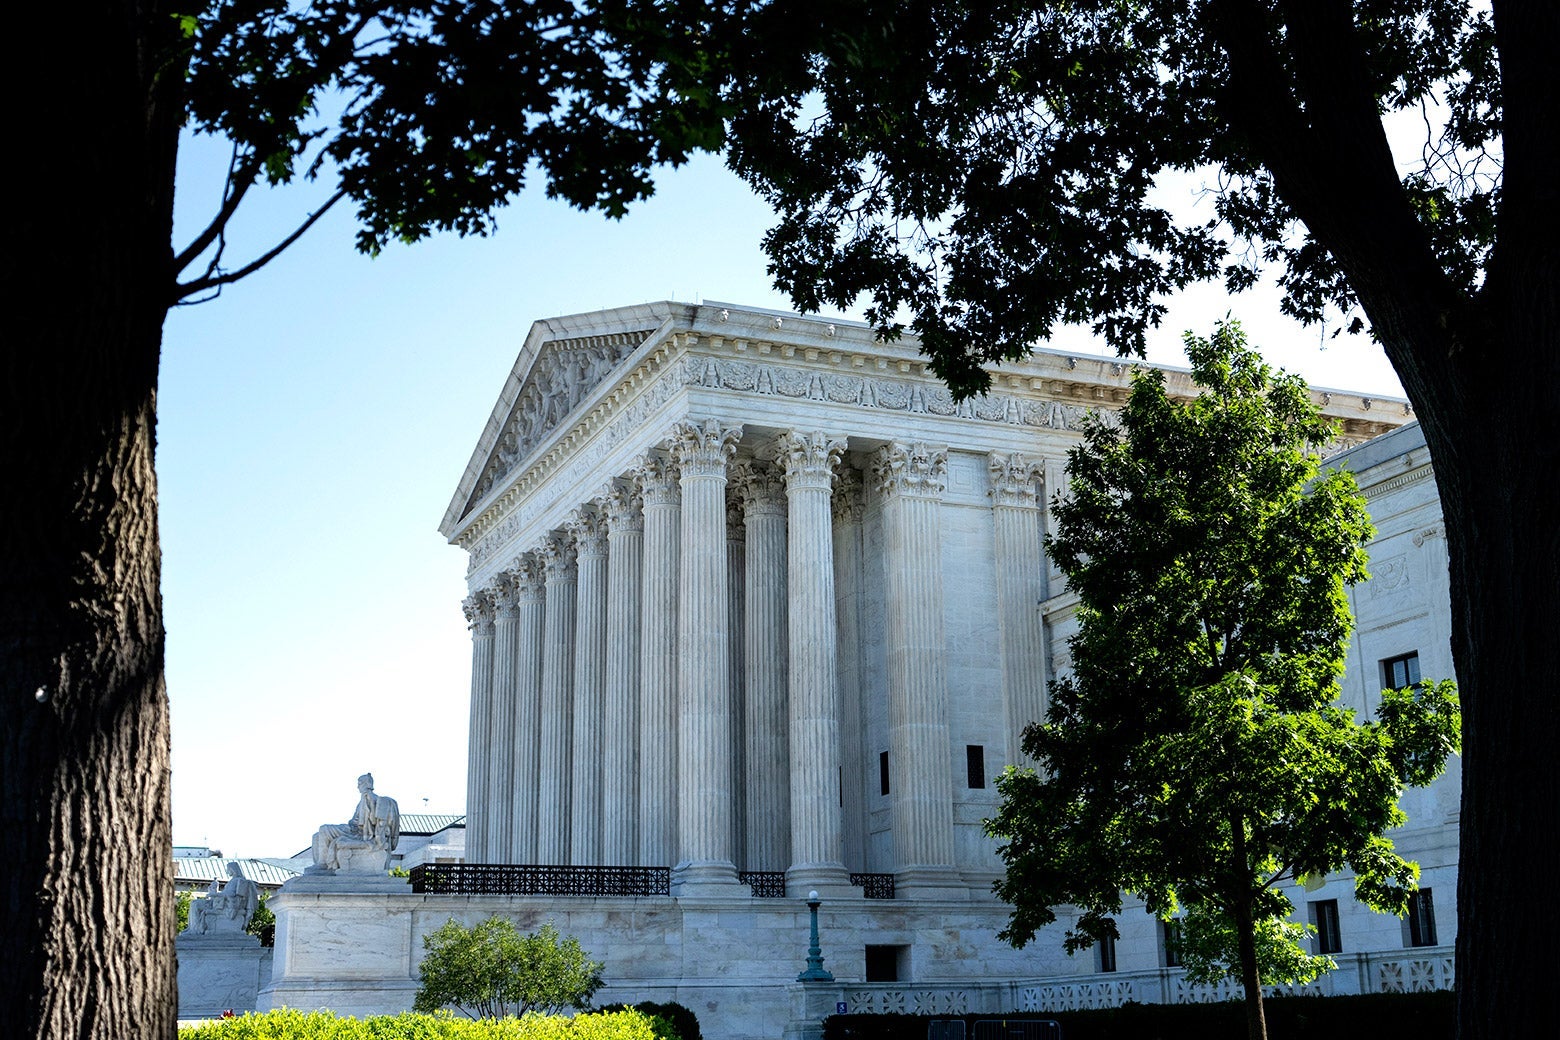 The Supreme Court is seen through some trees.